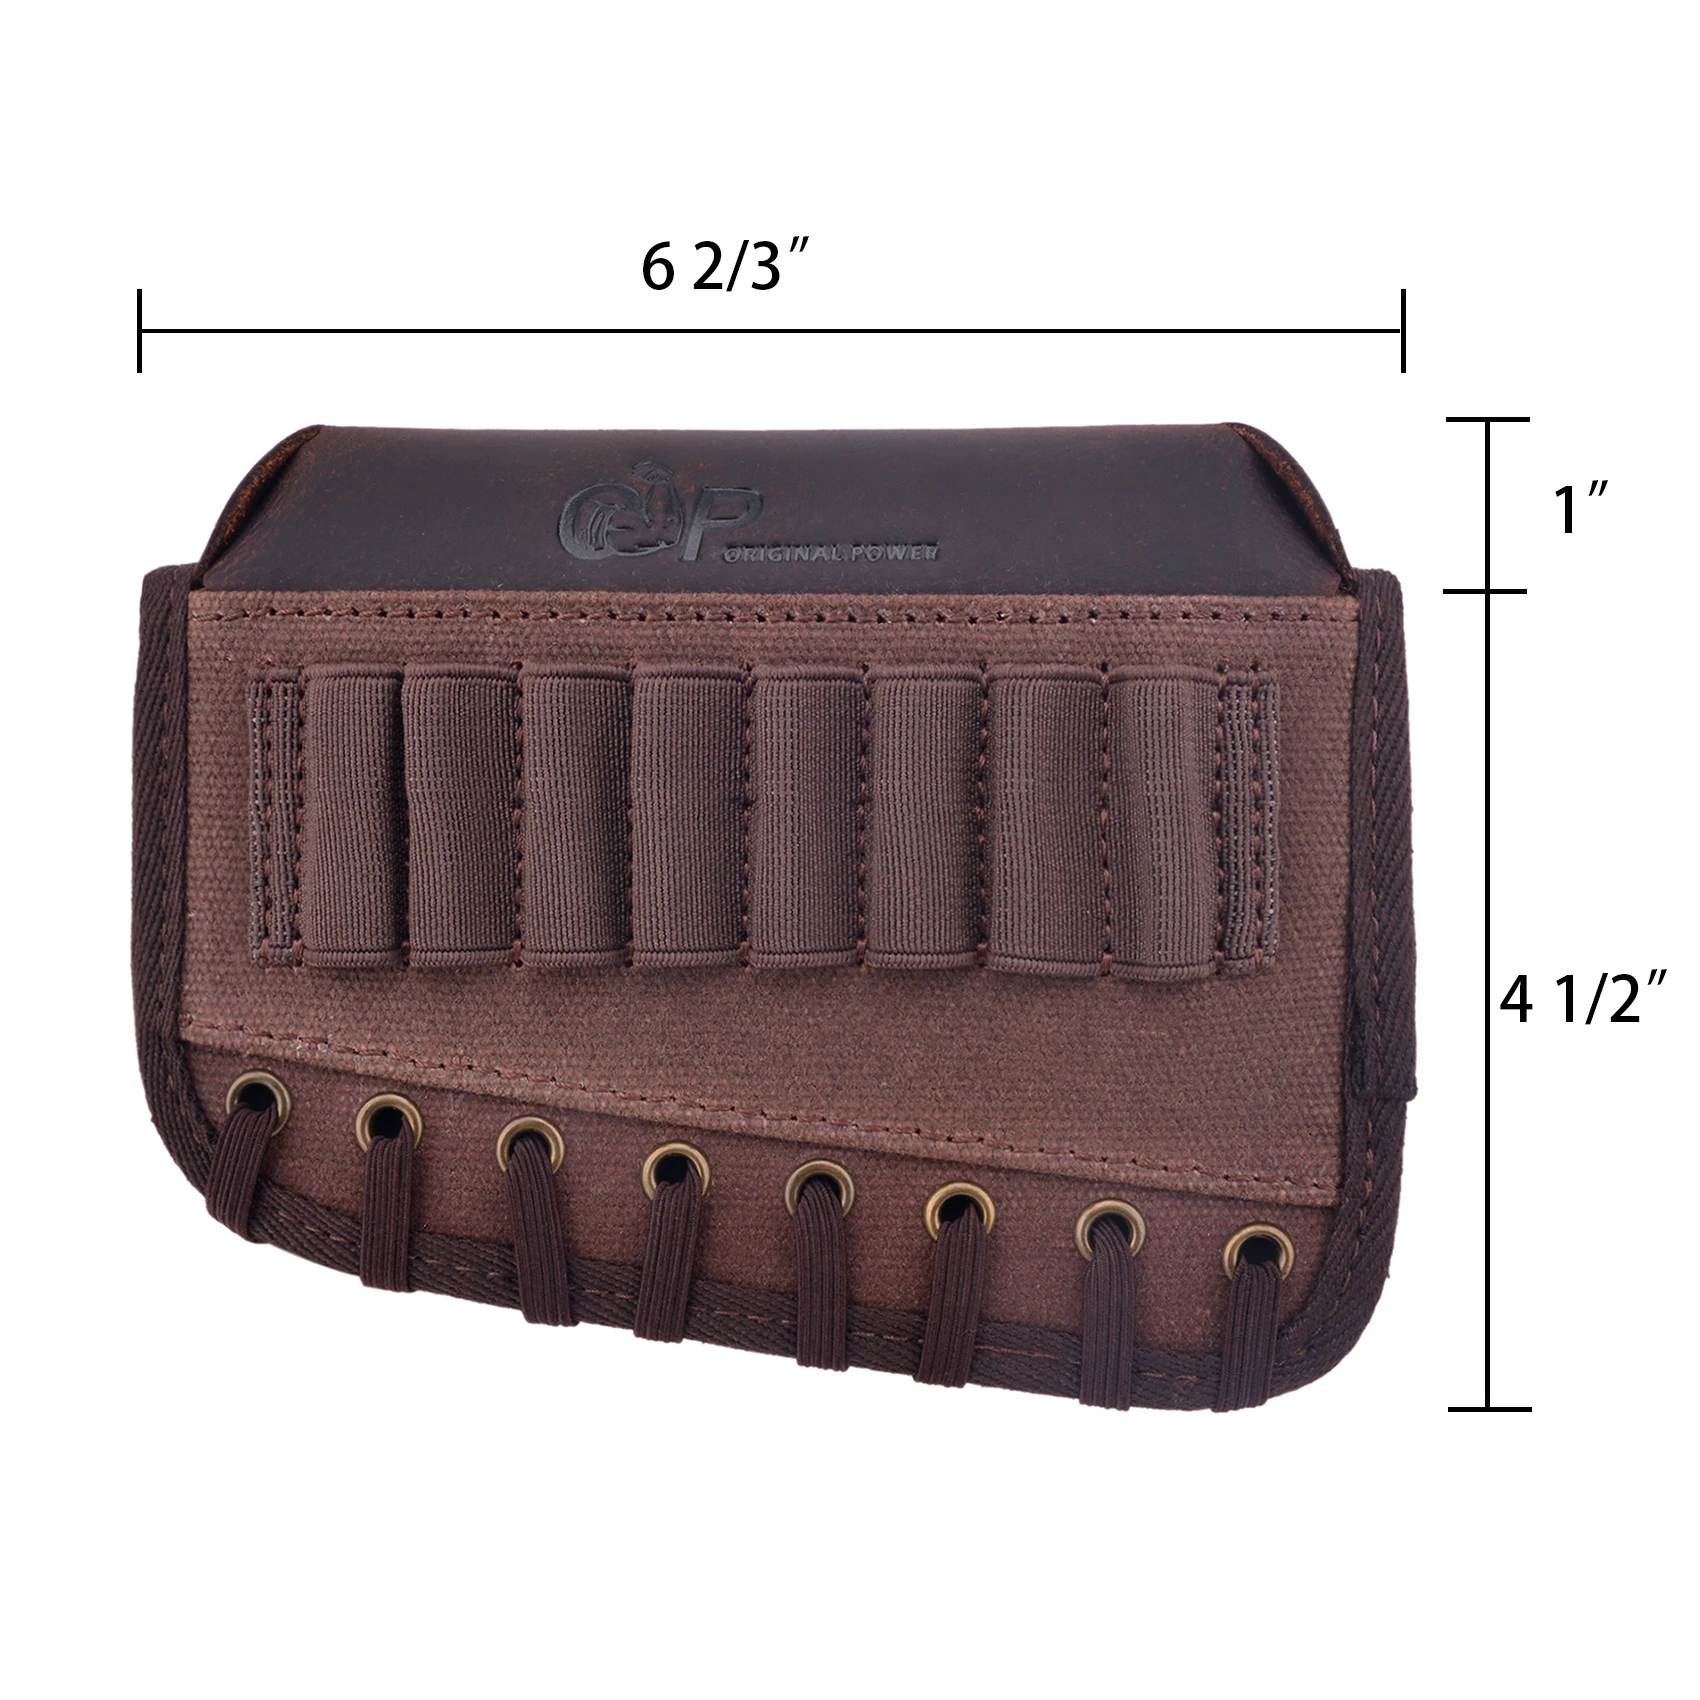 Leather Canvas Rifle Gun Buttstock Cover, Non-Slip Cheek Rest Pad for right or left handed